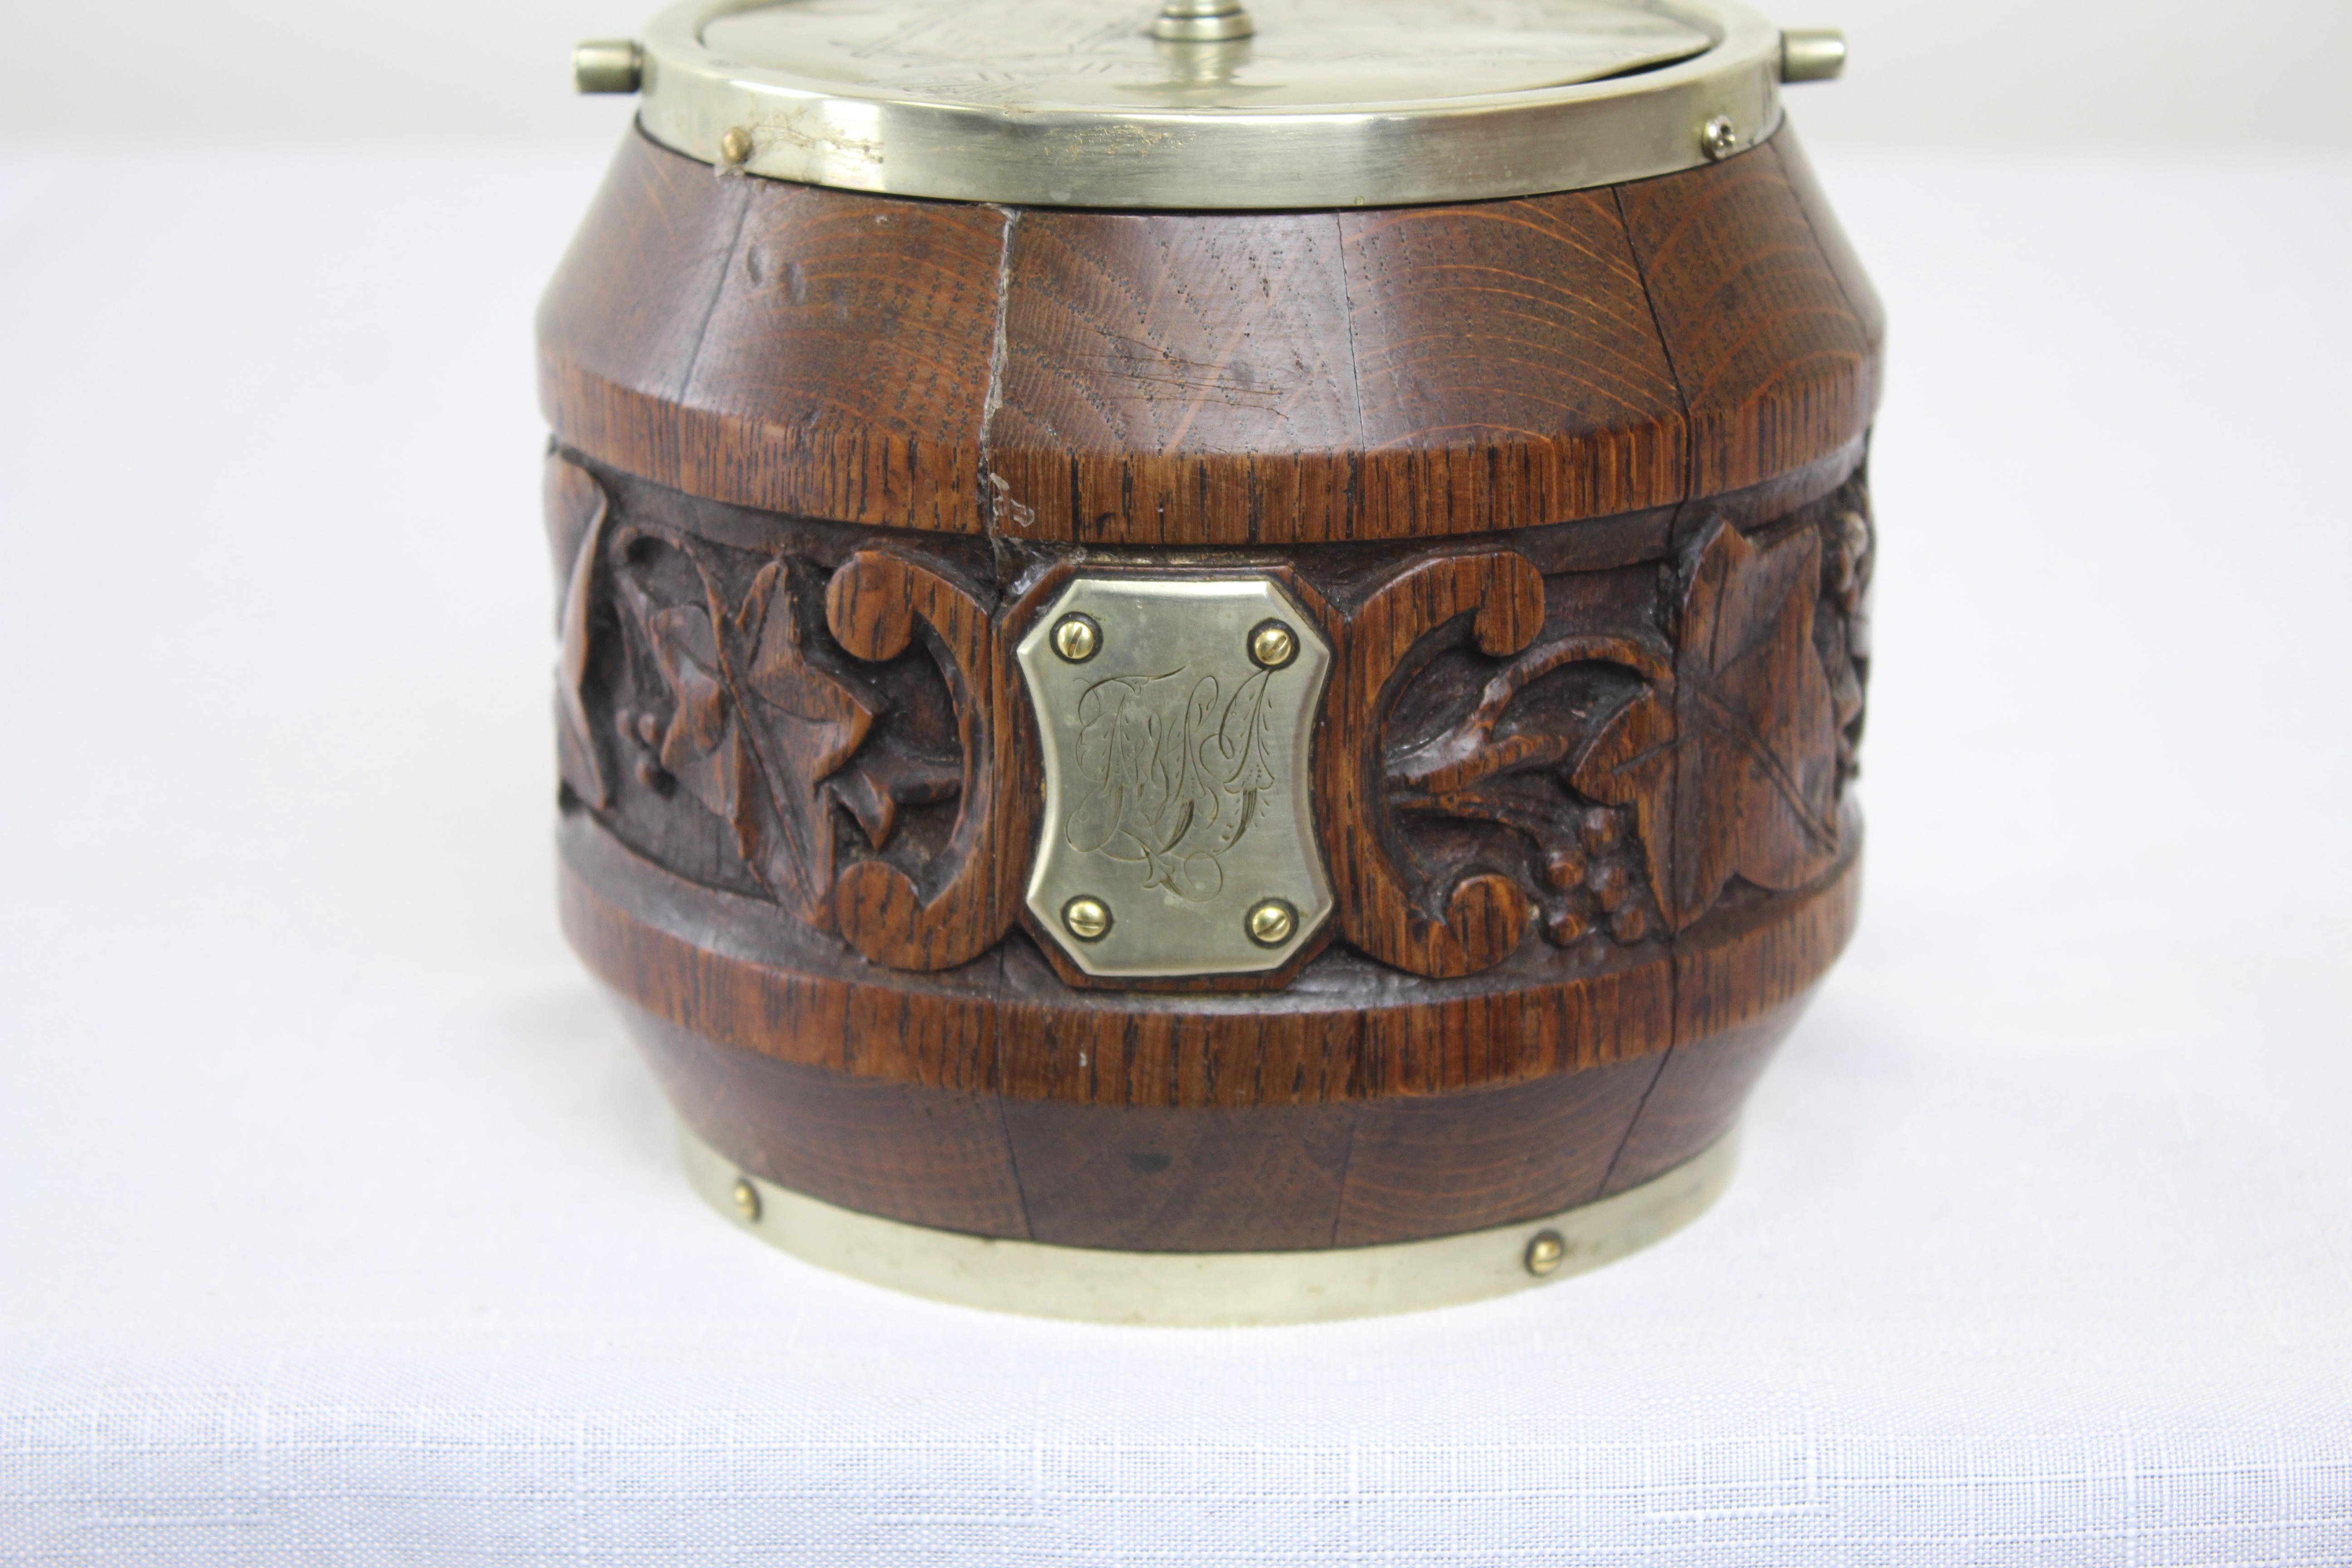 A charming oak biscuit barrel from the late 19th century with a carved grape and leaf pattern. The original owner's initials are etched in the center medallion. The metal is stamped 